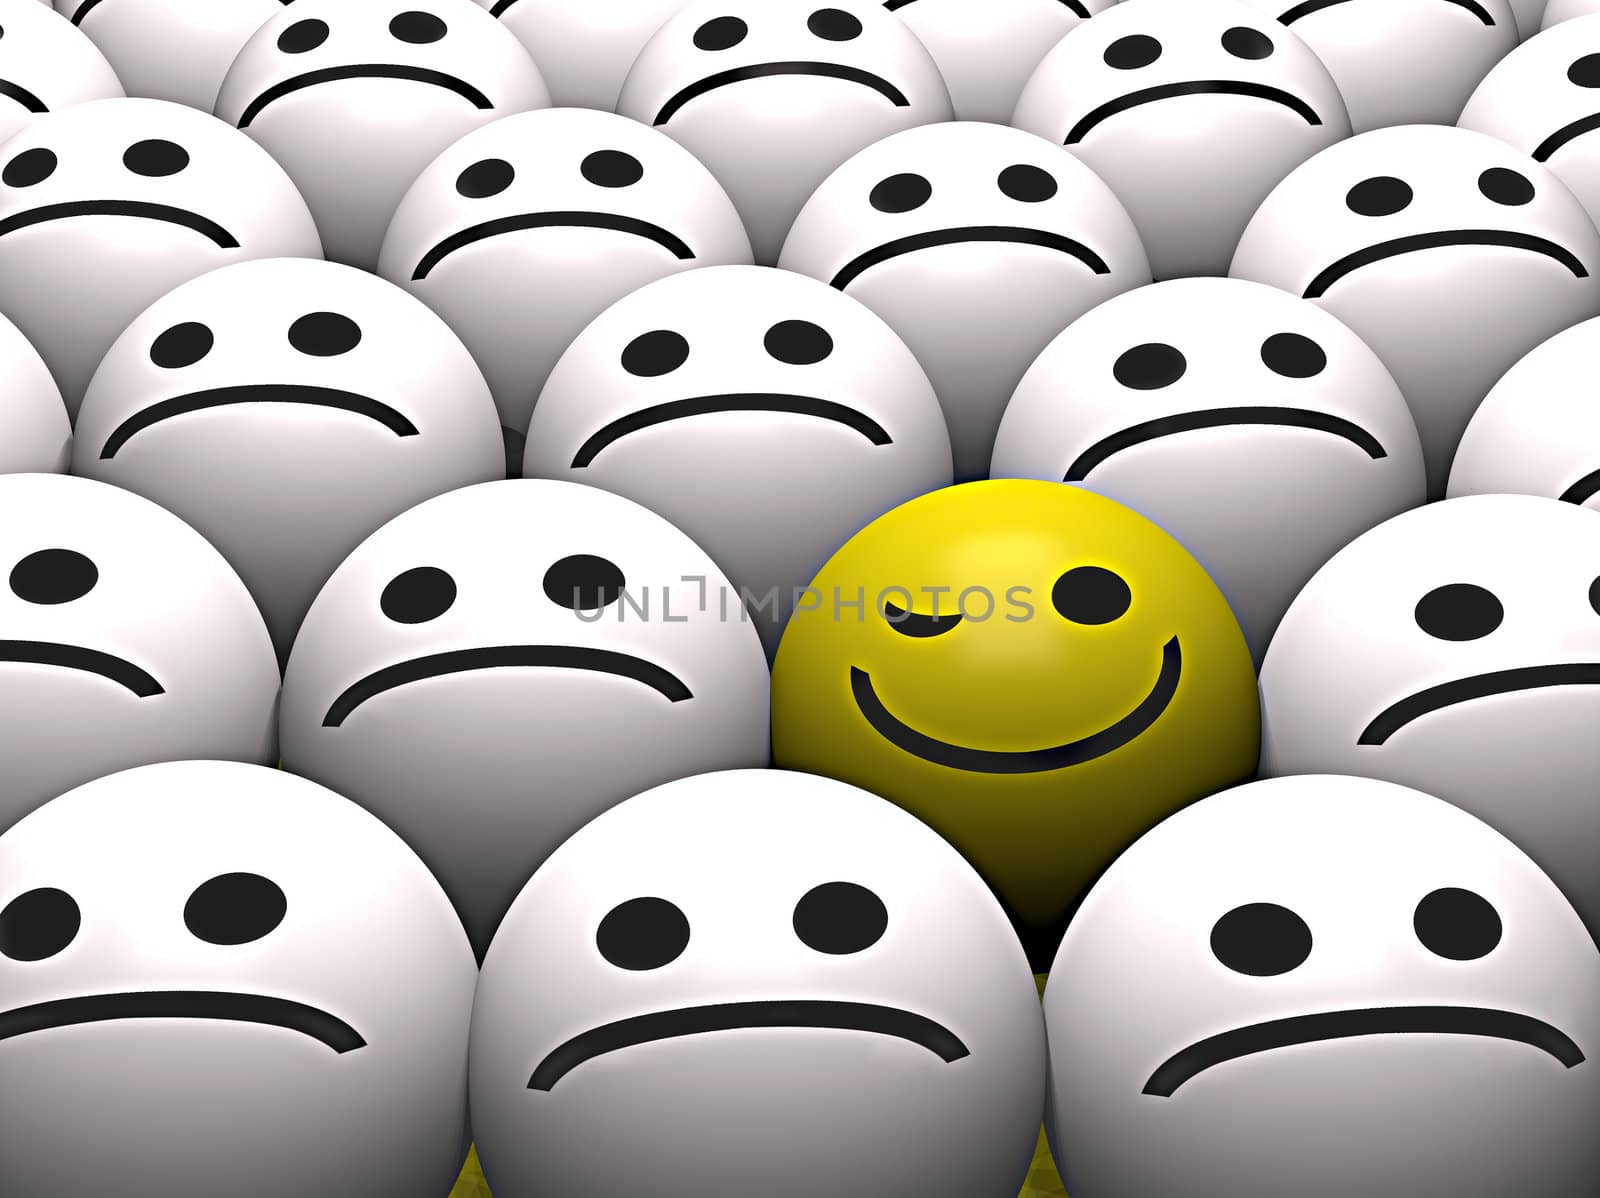 A winking yellow smiley stands out from the crowd